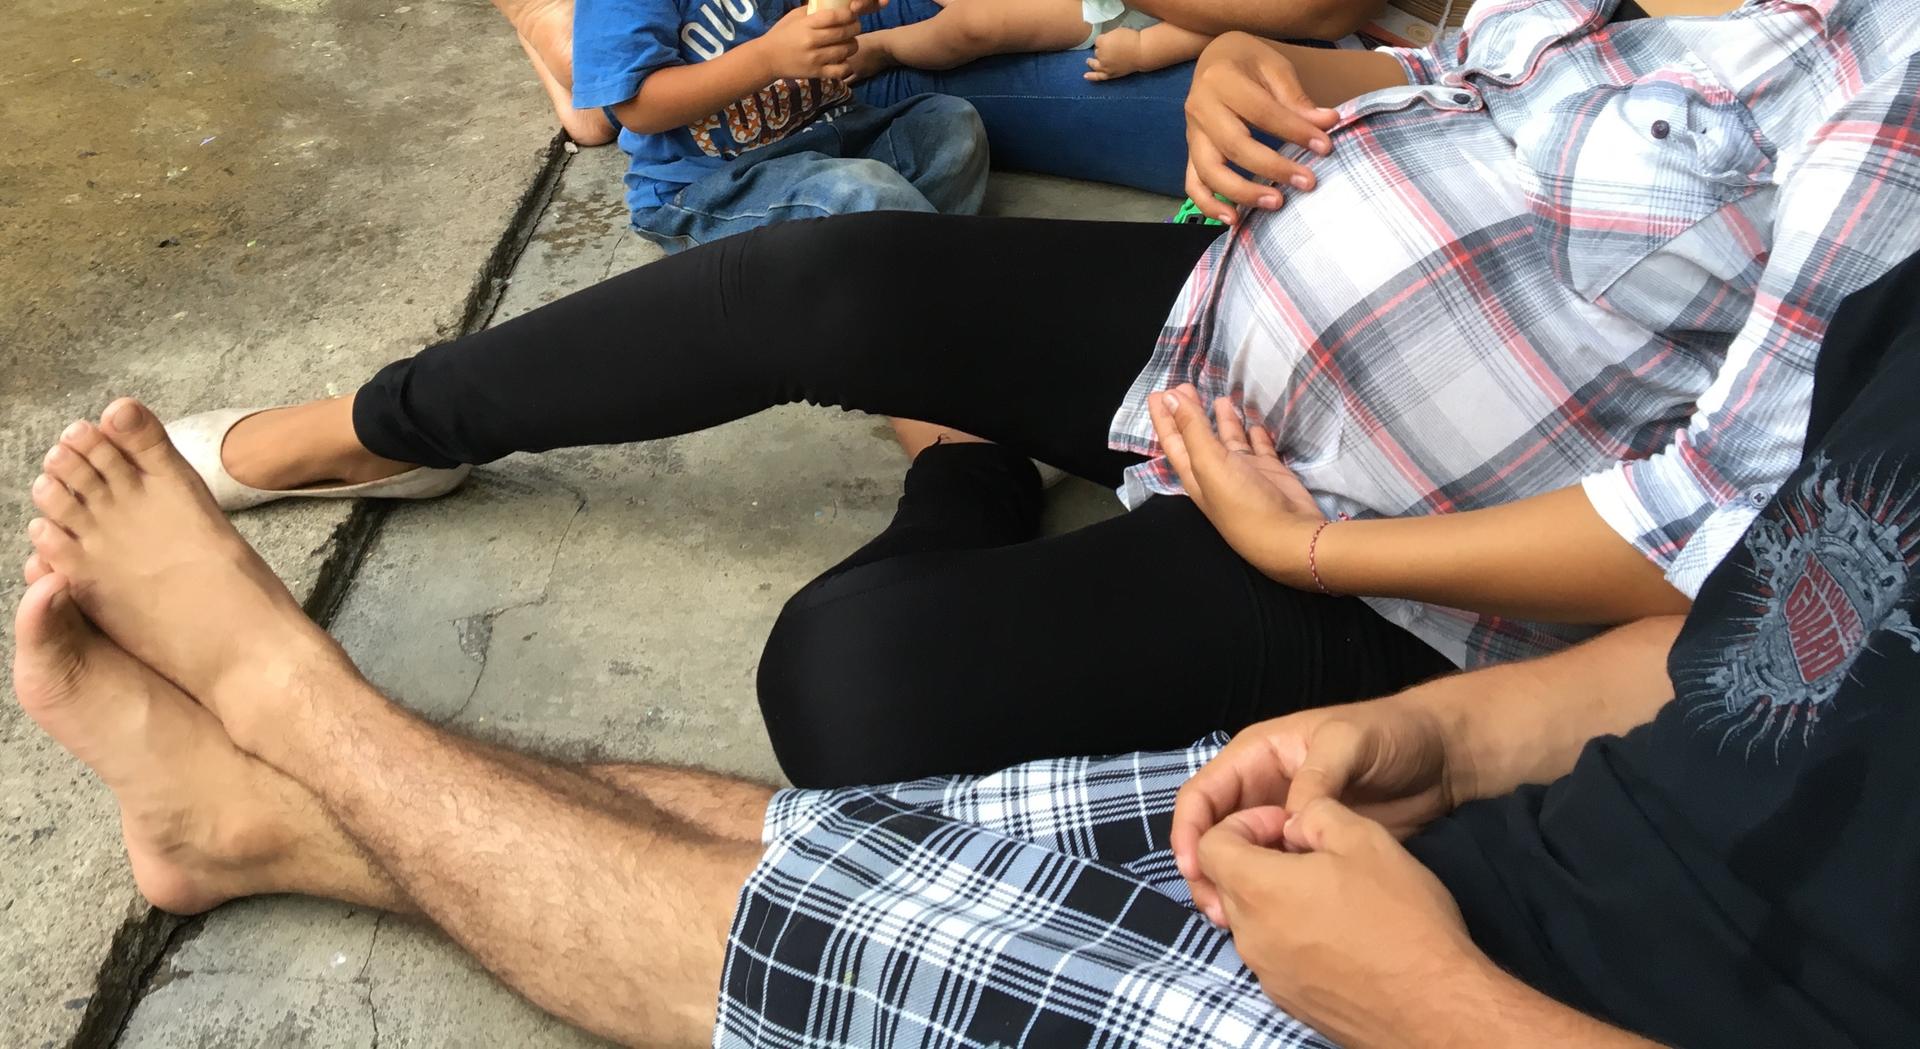 Bodies and feet of two young people, one pregnant